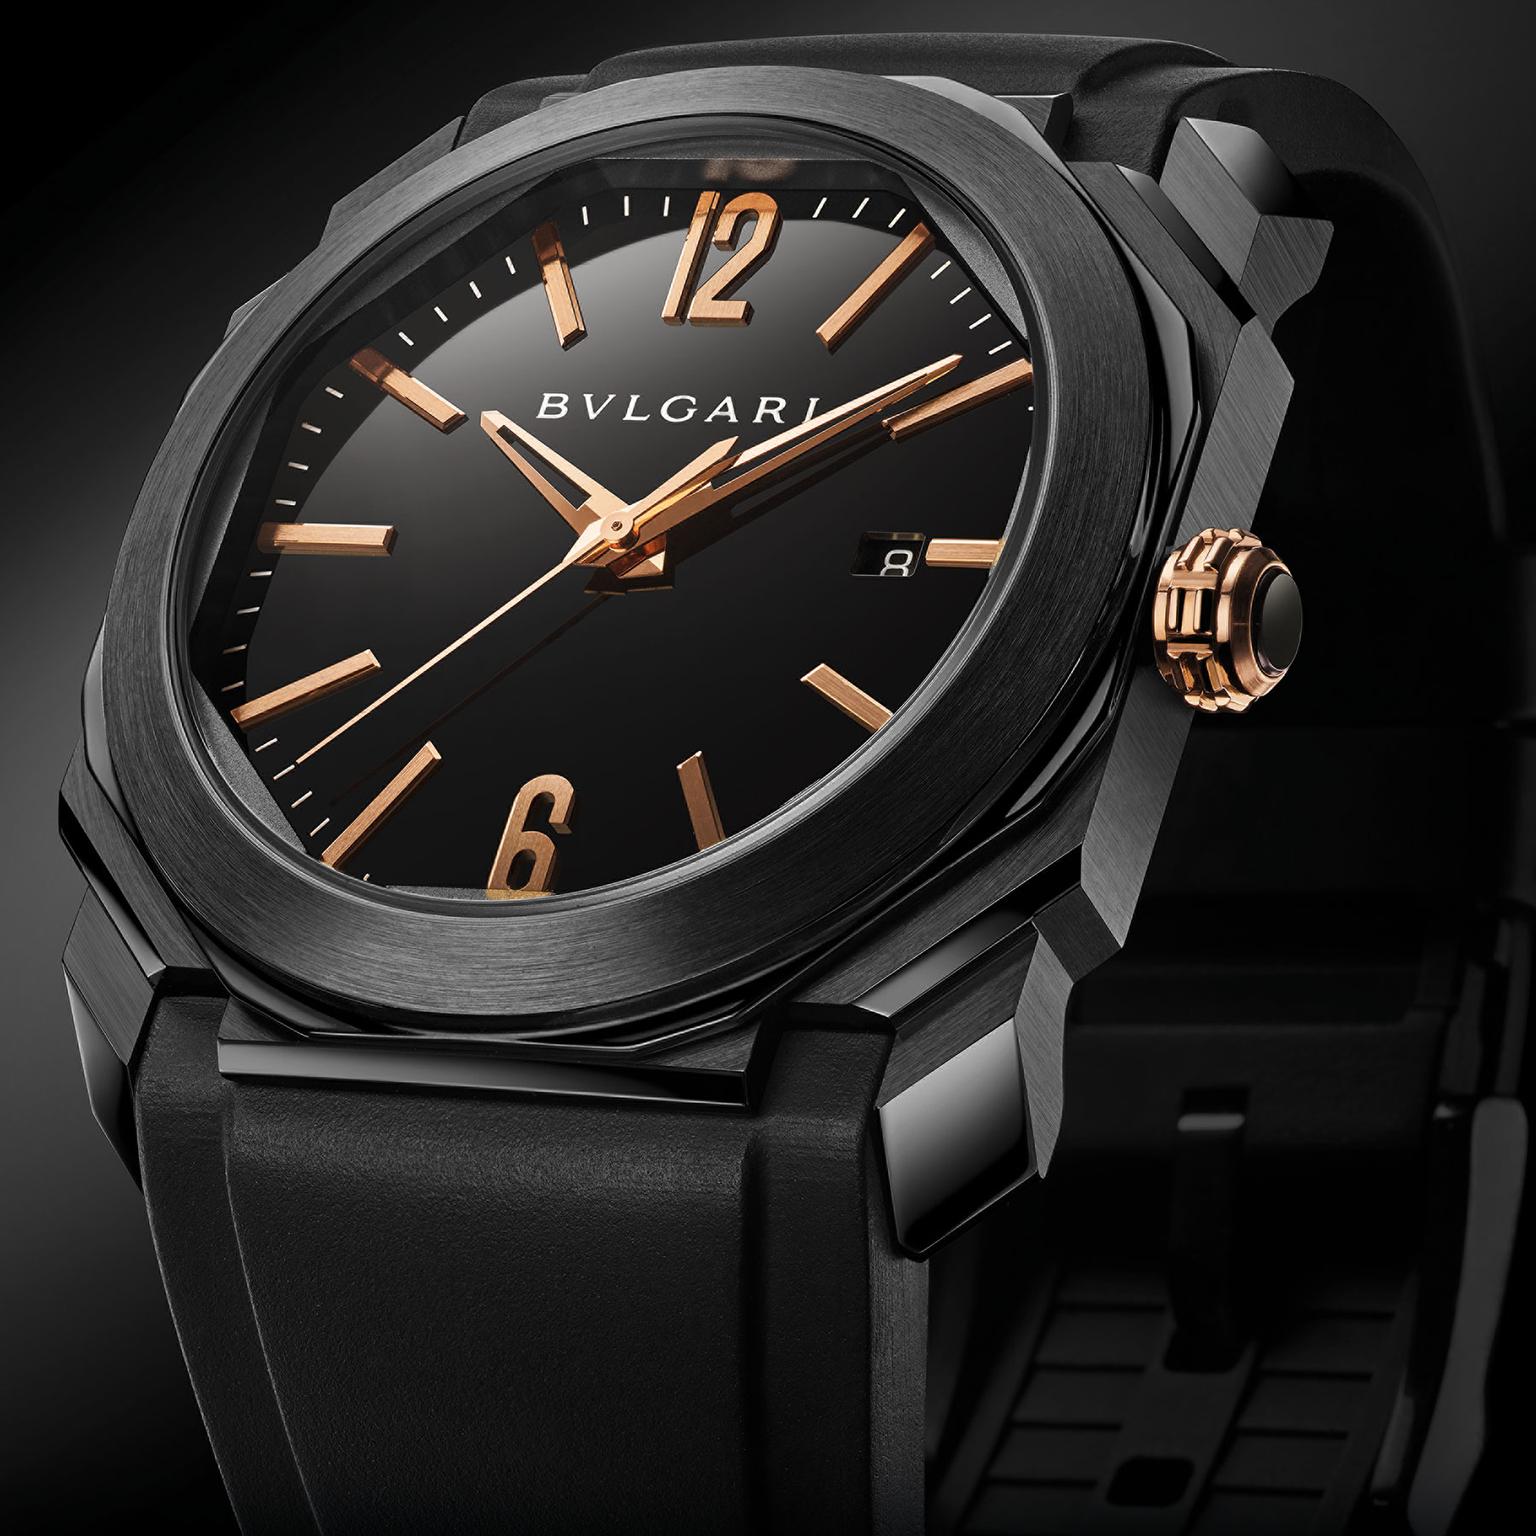 The All Black men's watches from Hublot and more